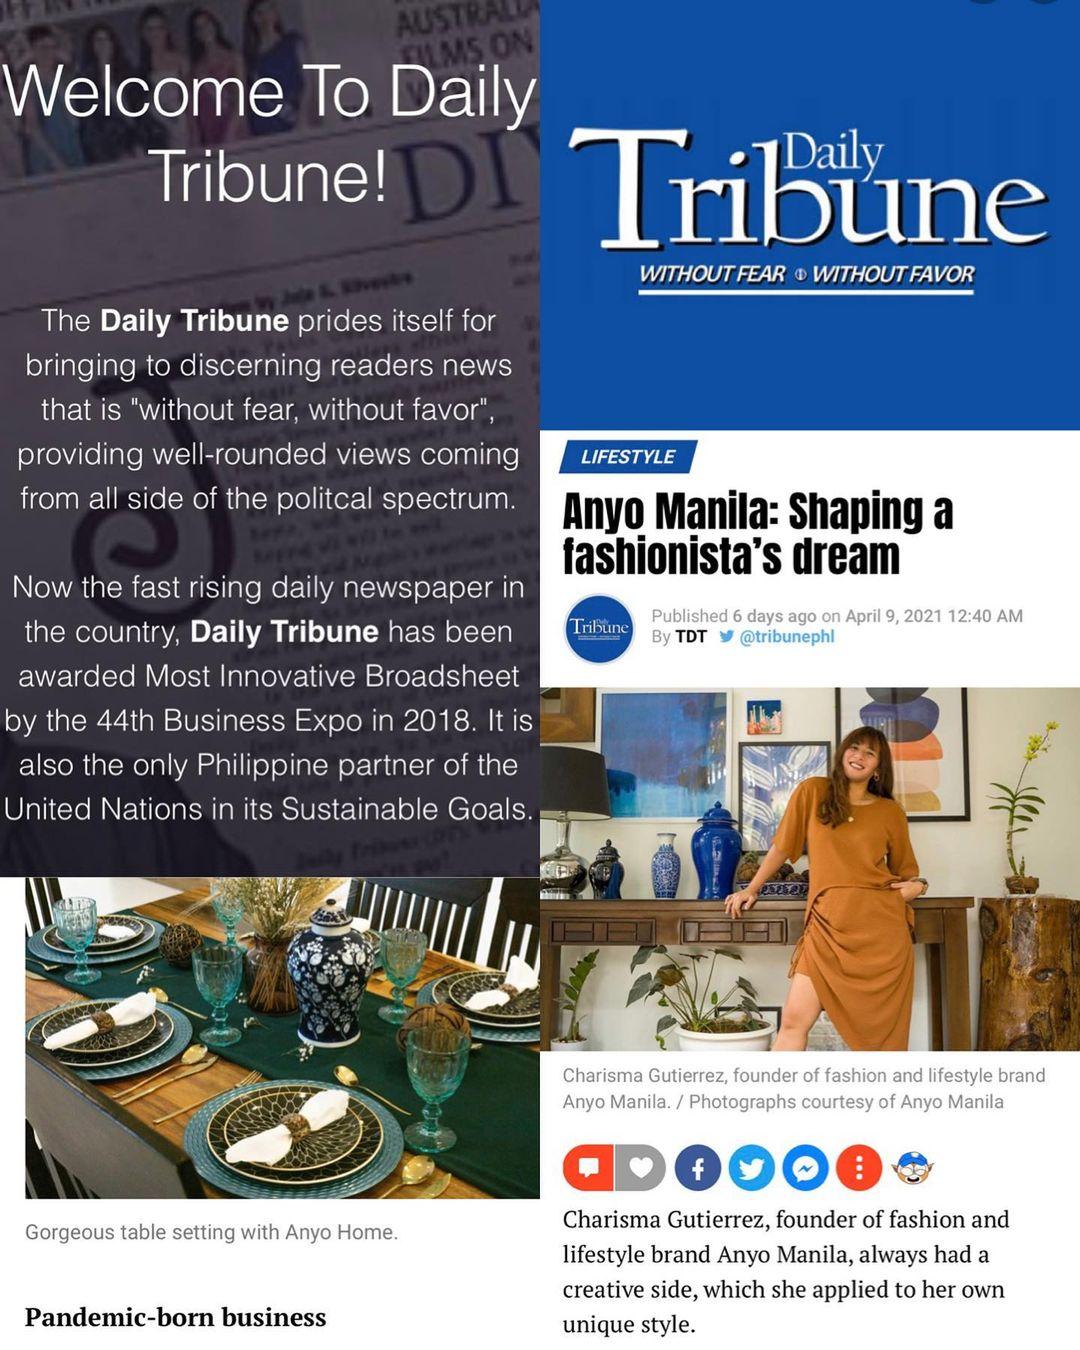 class="content__text"I’m honored to be featured 🥰 Thank you, @tribunephl 🤍 #DreamInStyleWithAnyo

Check out the full article: https://tribune.net.ph/index.php/2021/04/09/anyo-manila-shaping-a-fashionistas-dream/